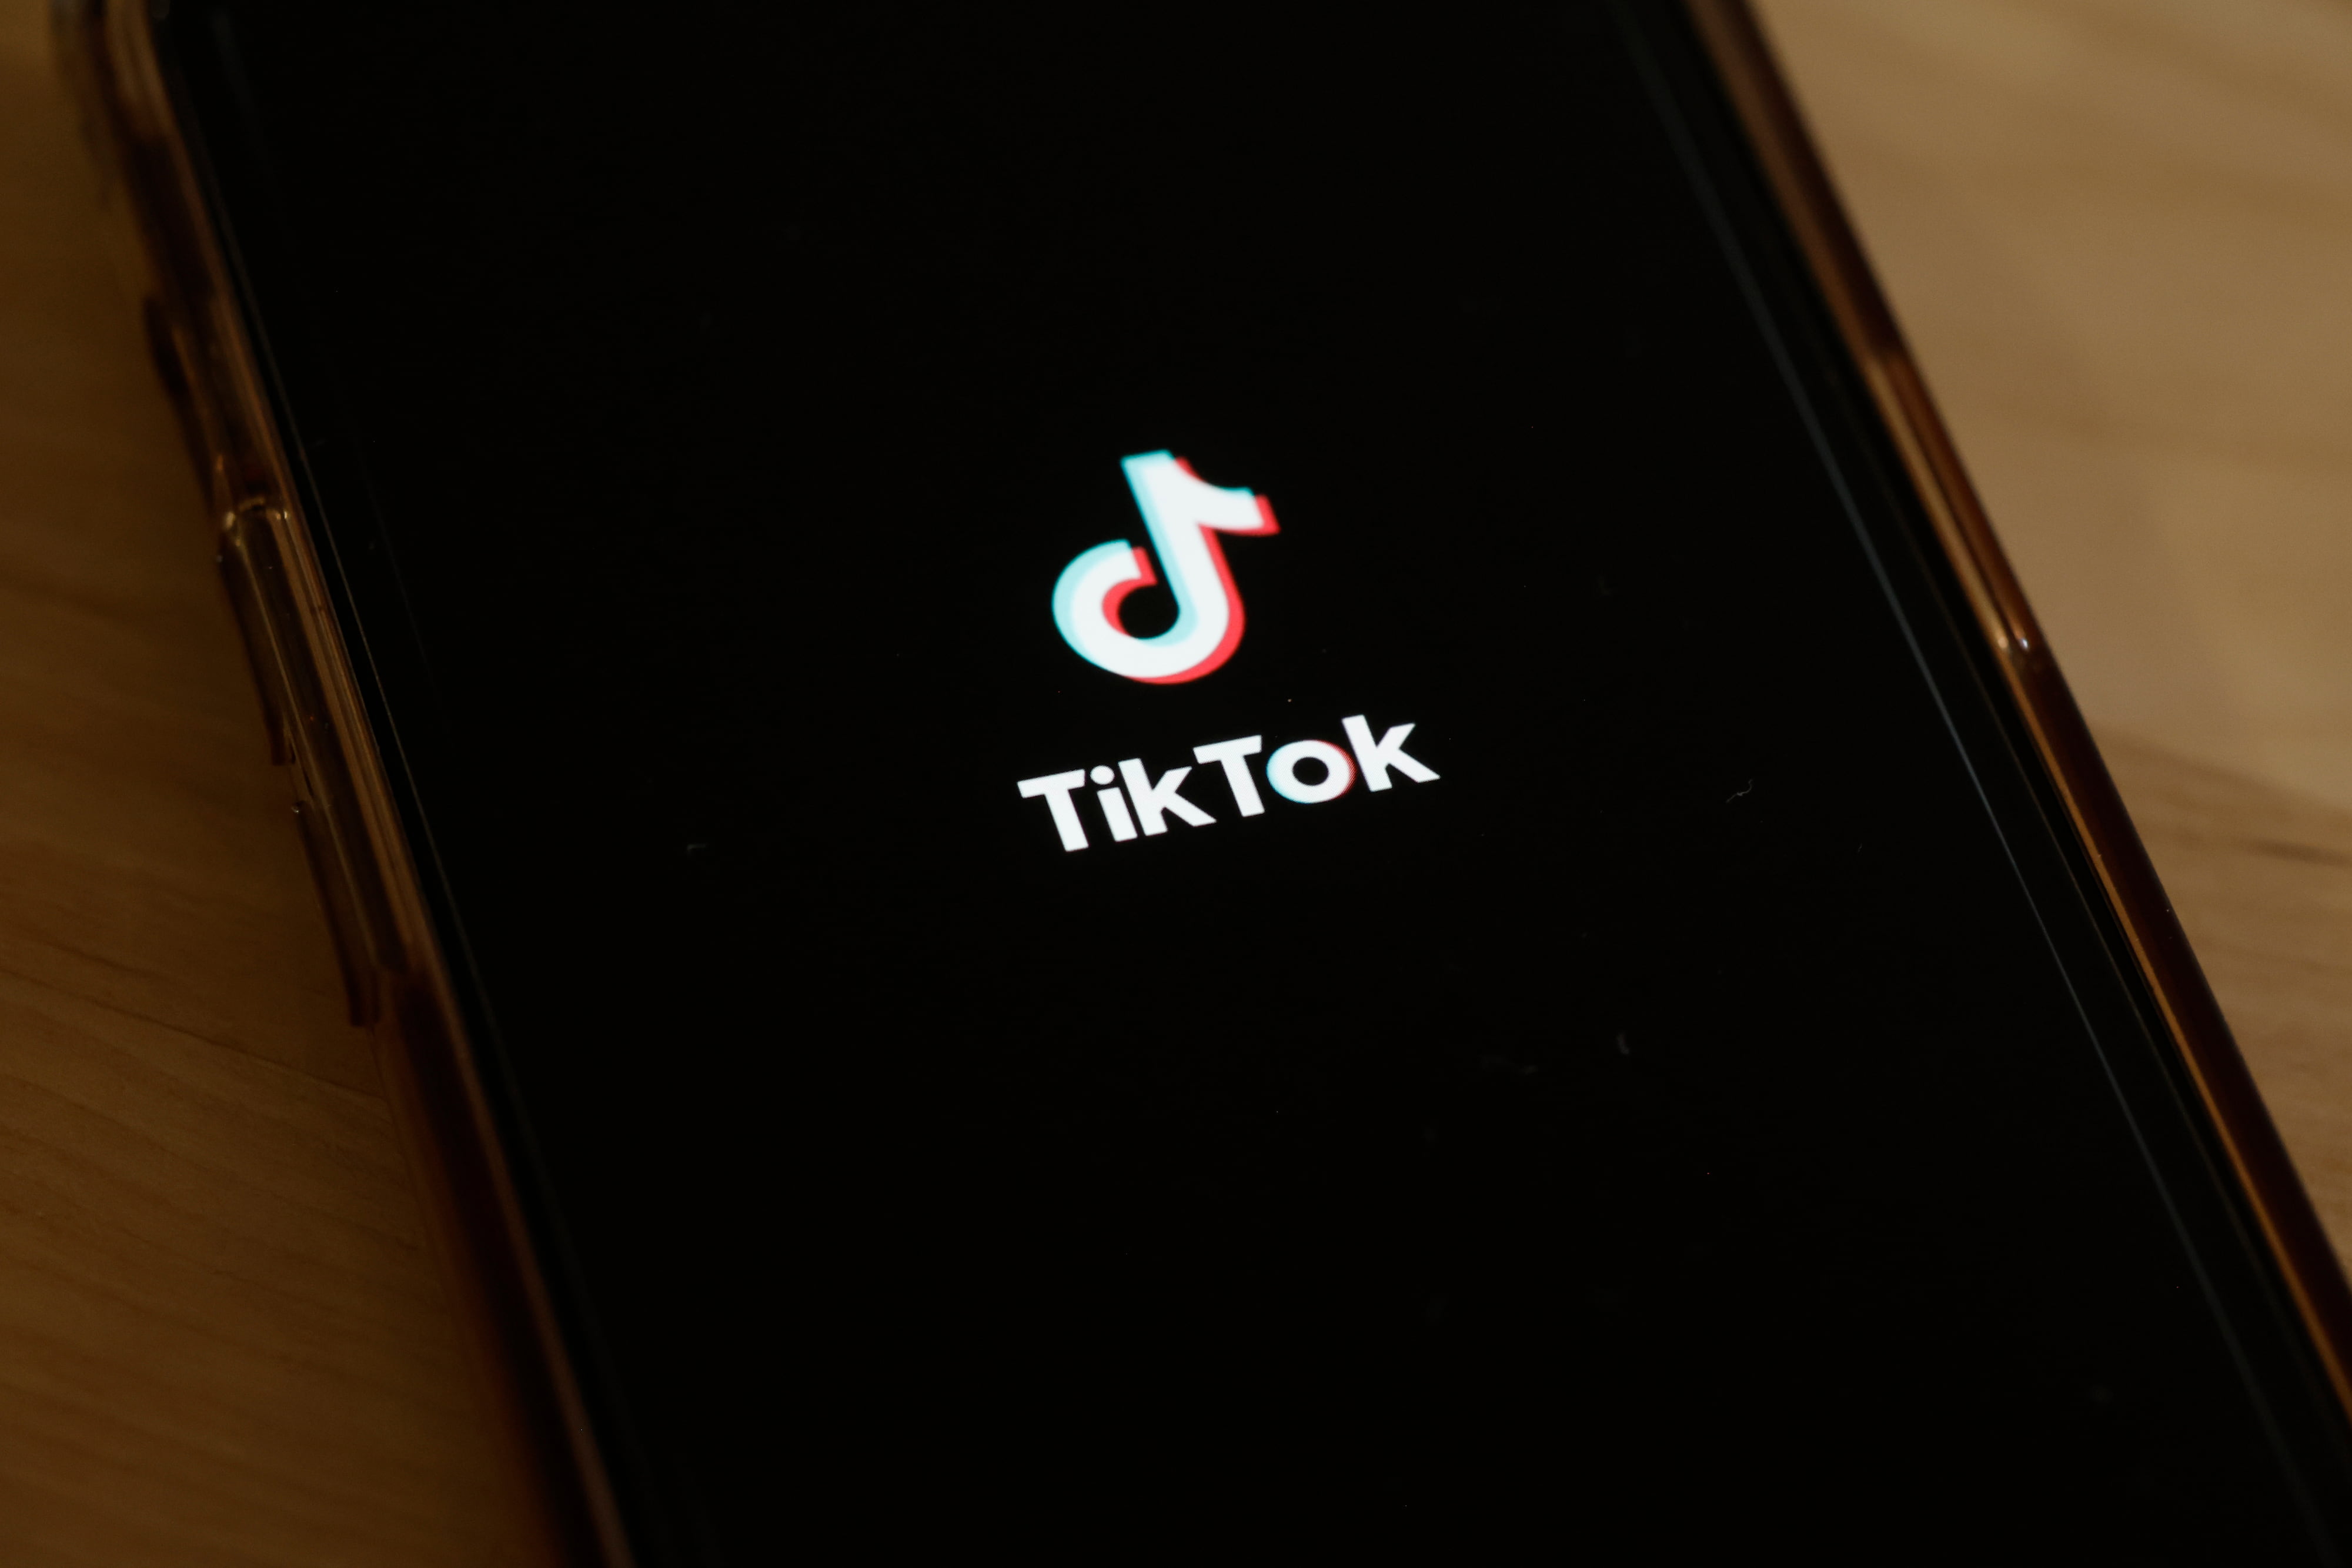 Reports: FTC Probing TikTok Over Data, Security Practices